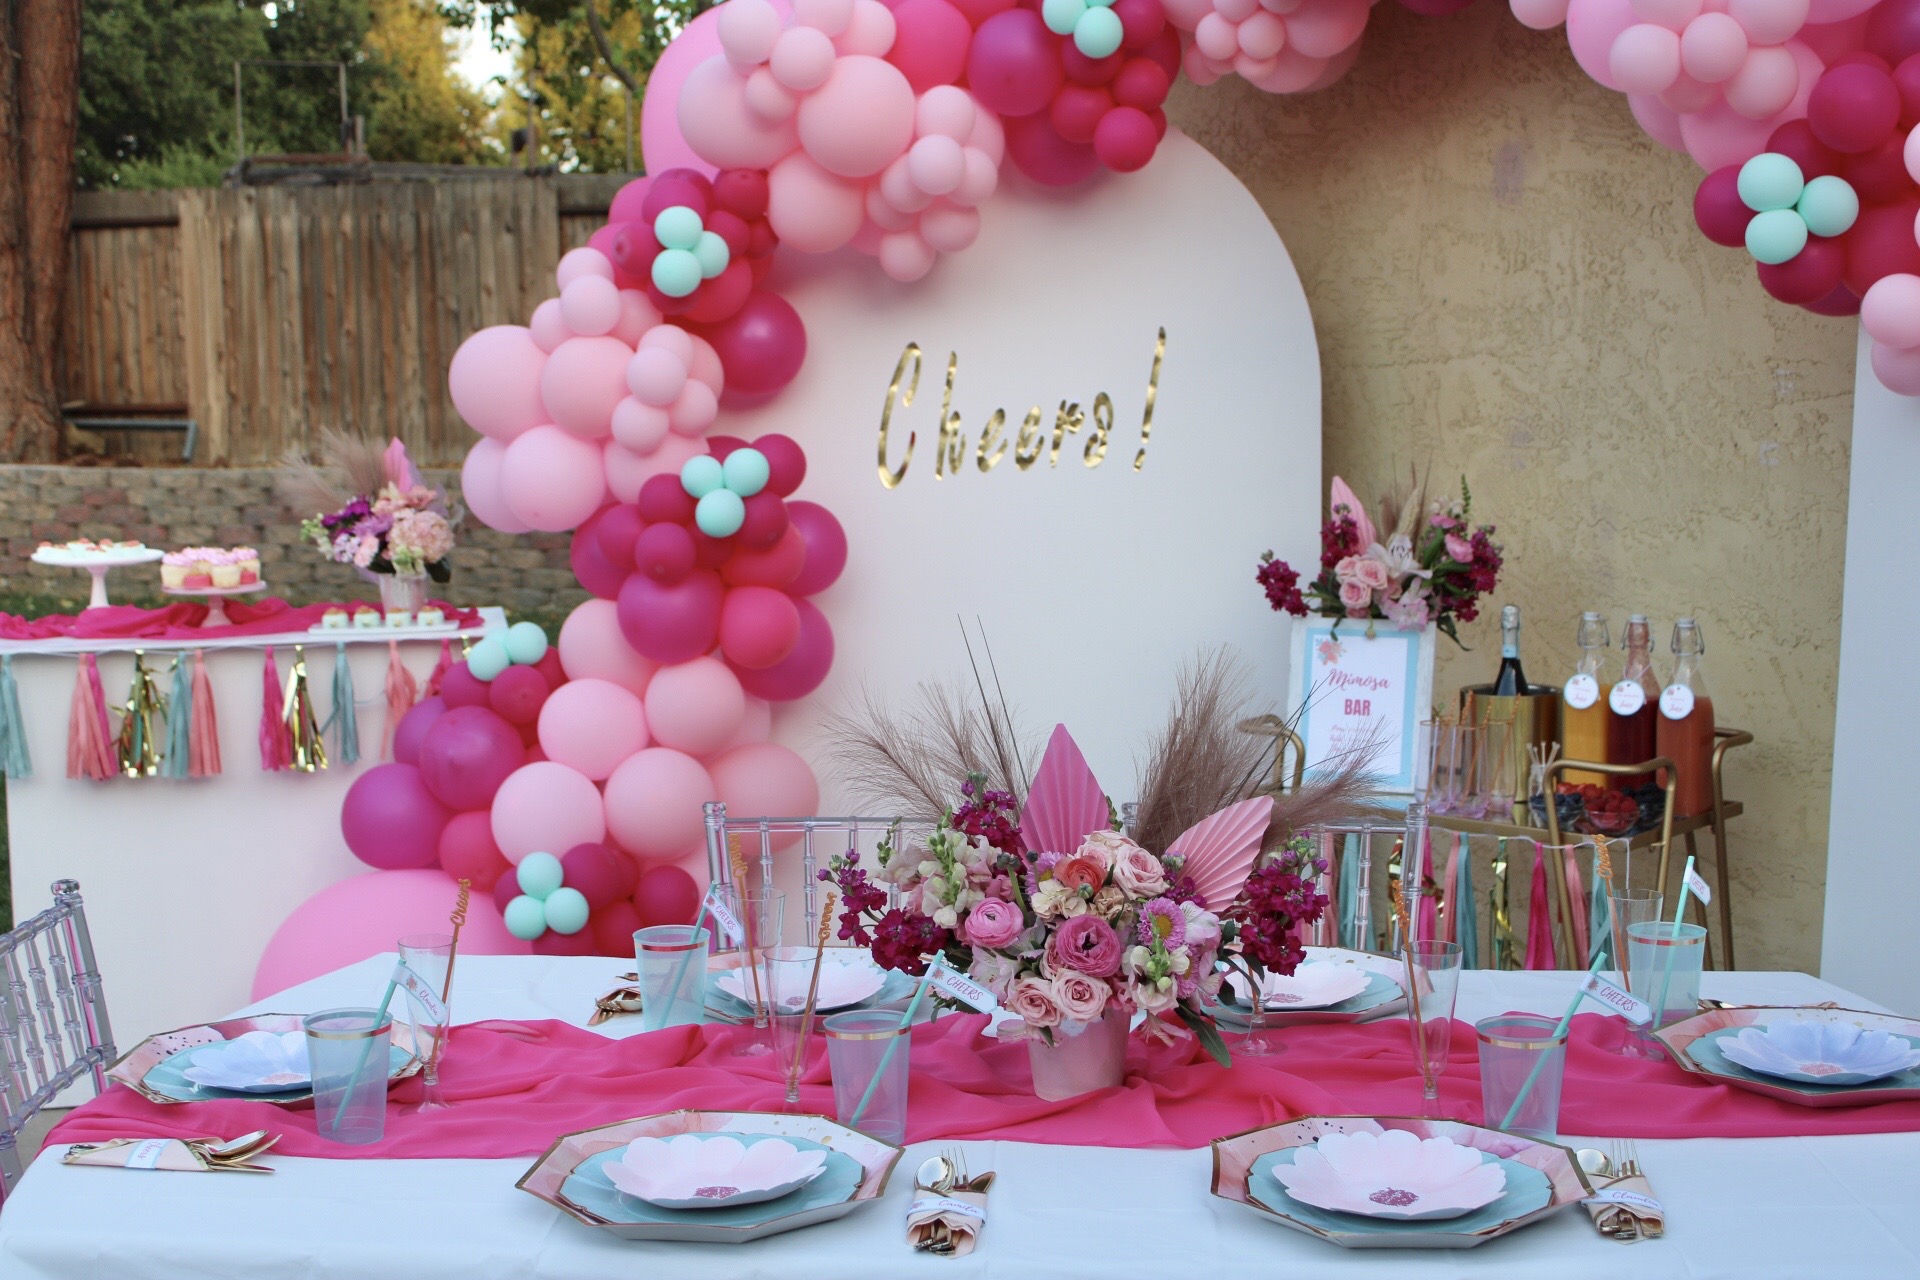 Cheers! - Party Design, Styling and Decoration - North Bay California